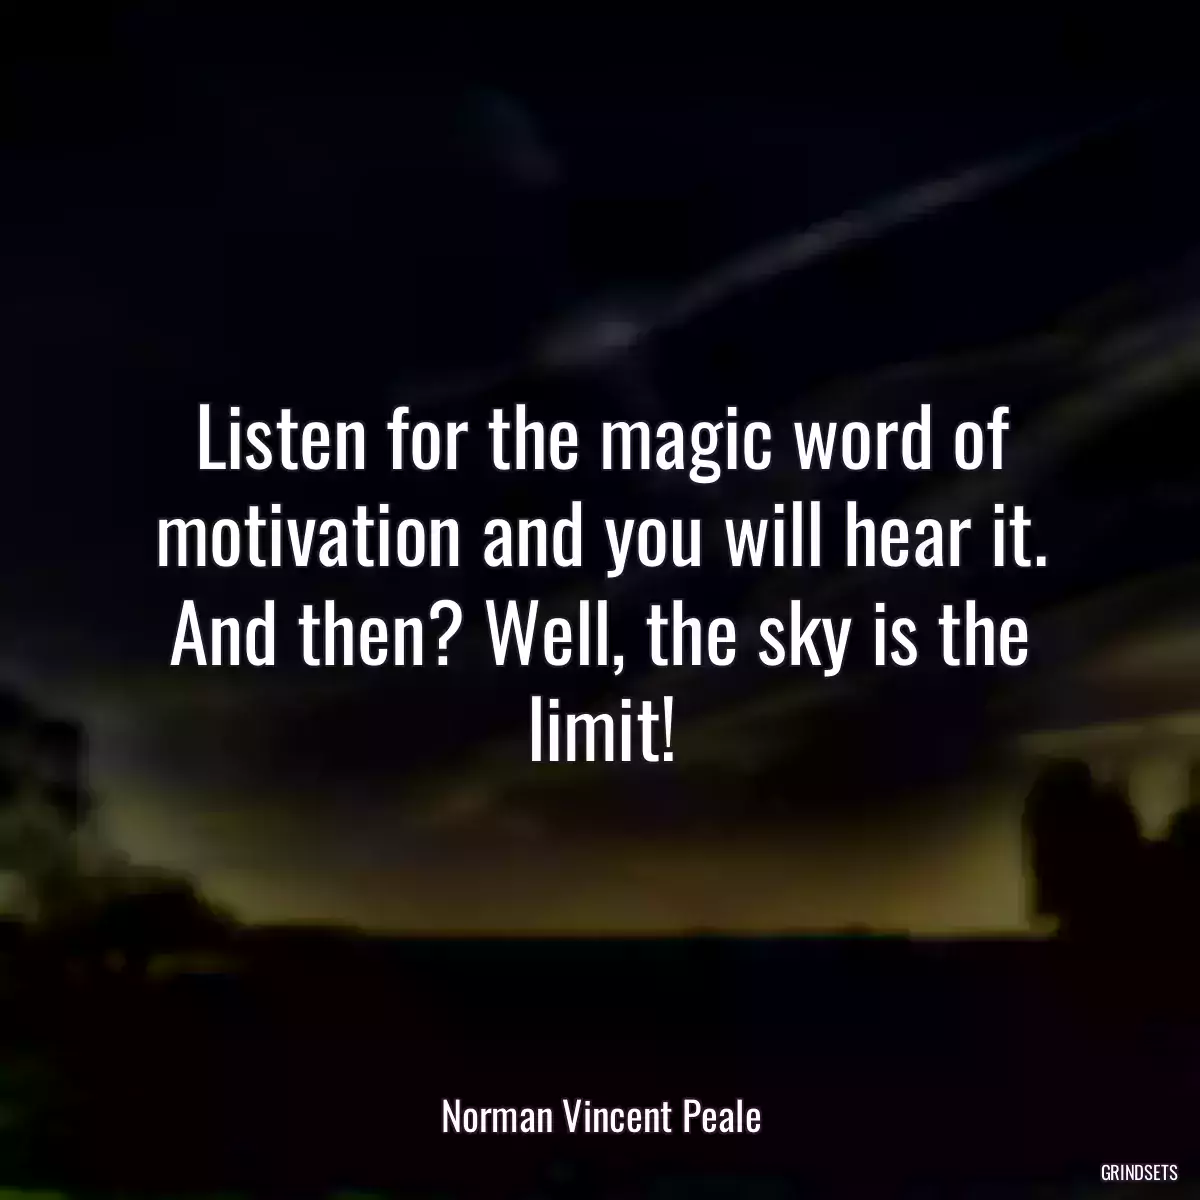 Listen for the magic word of motivation and you will hear it. And then? Well, the sky is the limit!